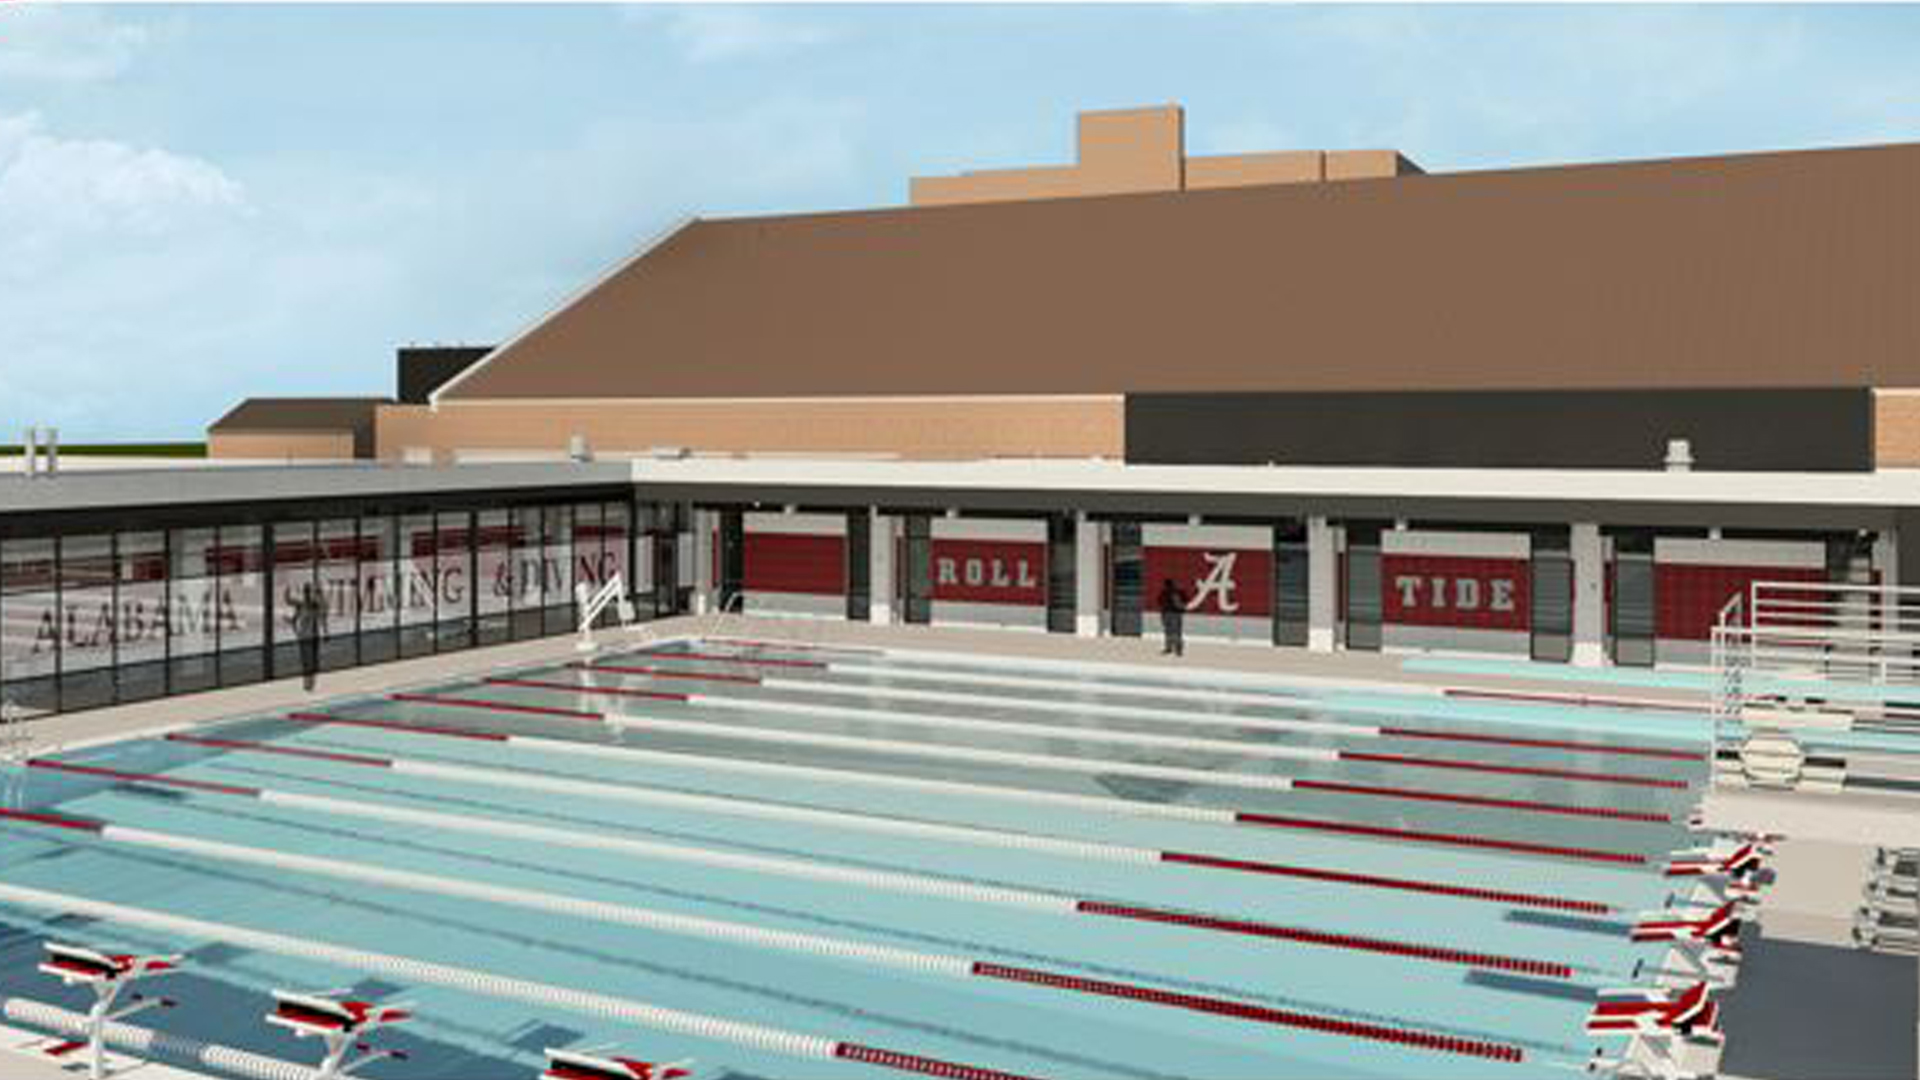 Renovations to Aquatic Center to Cause Bryant Drive Lane Closures